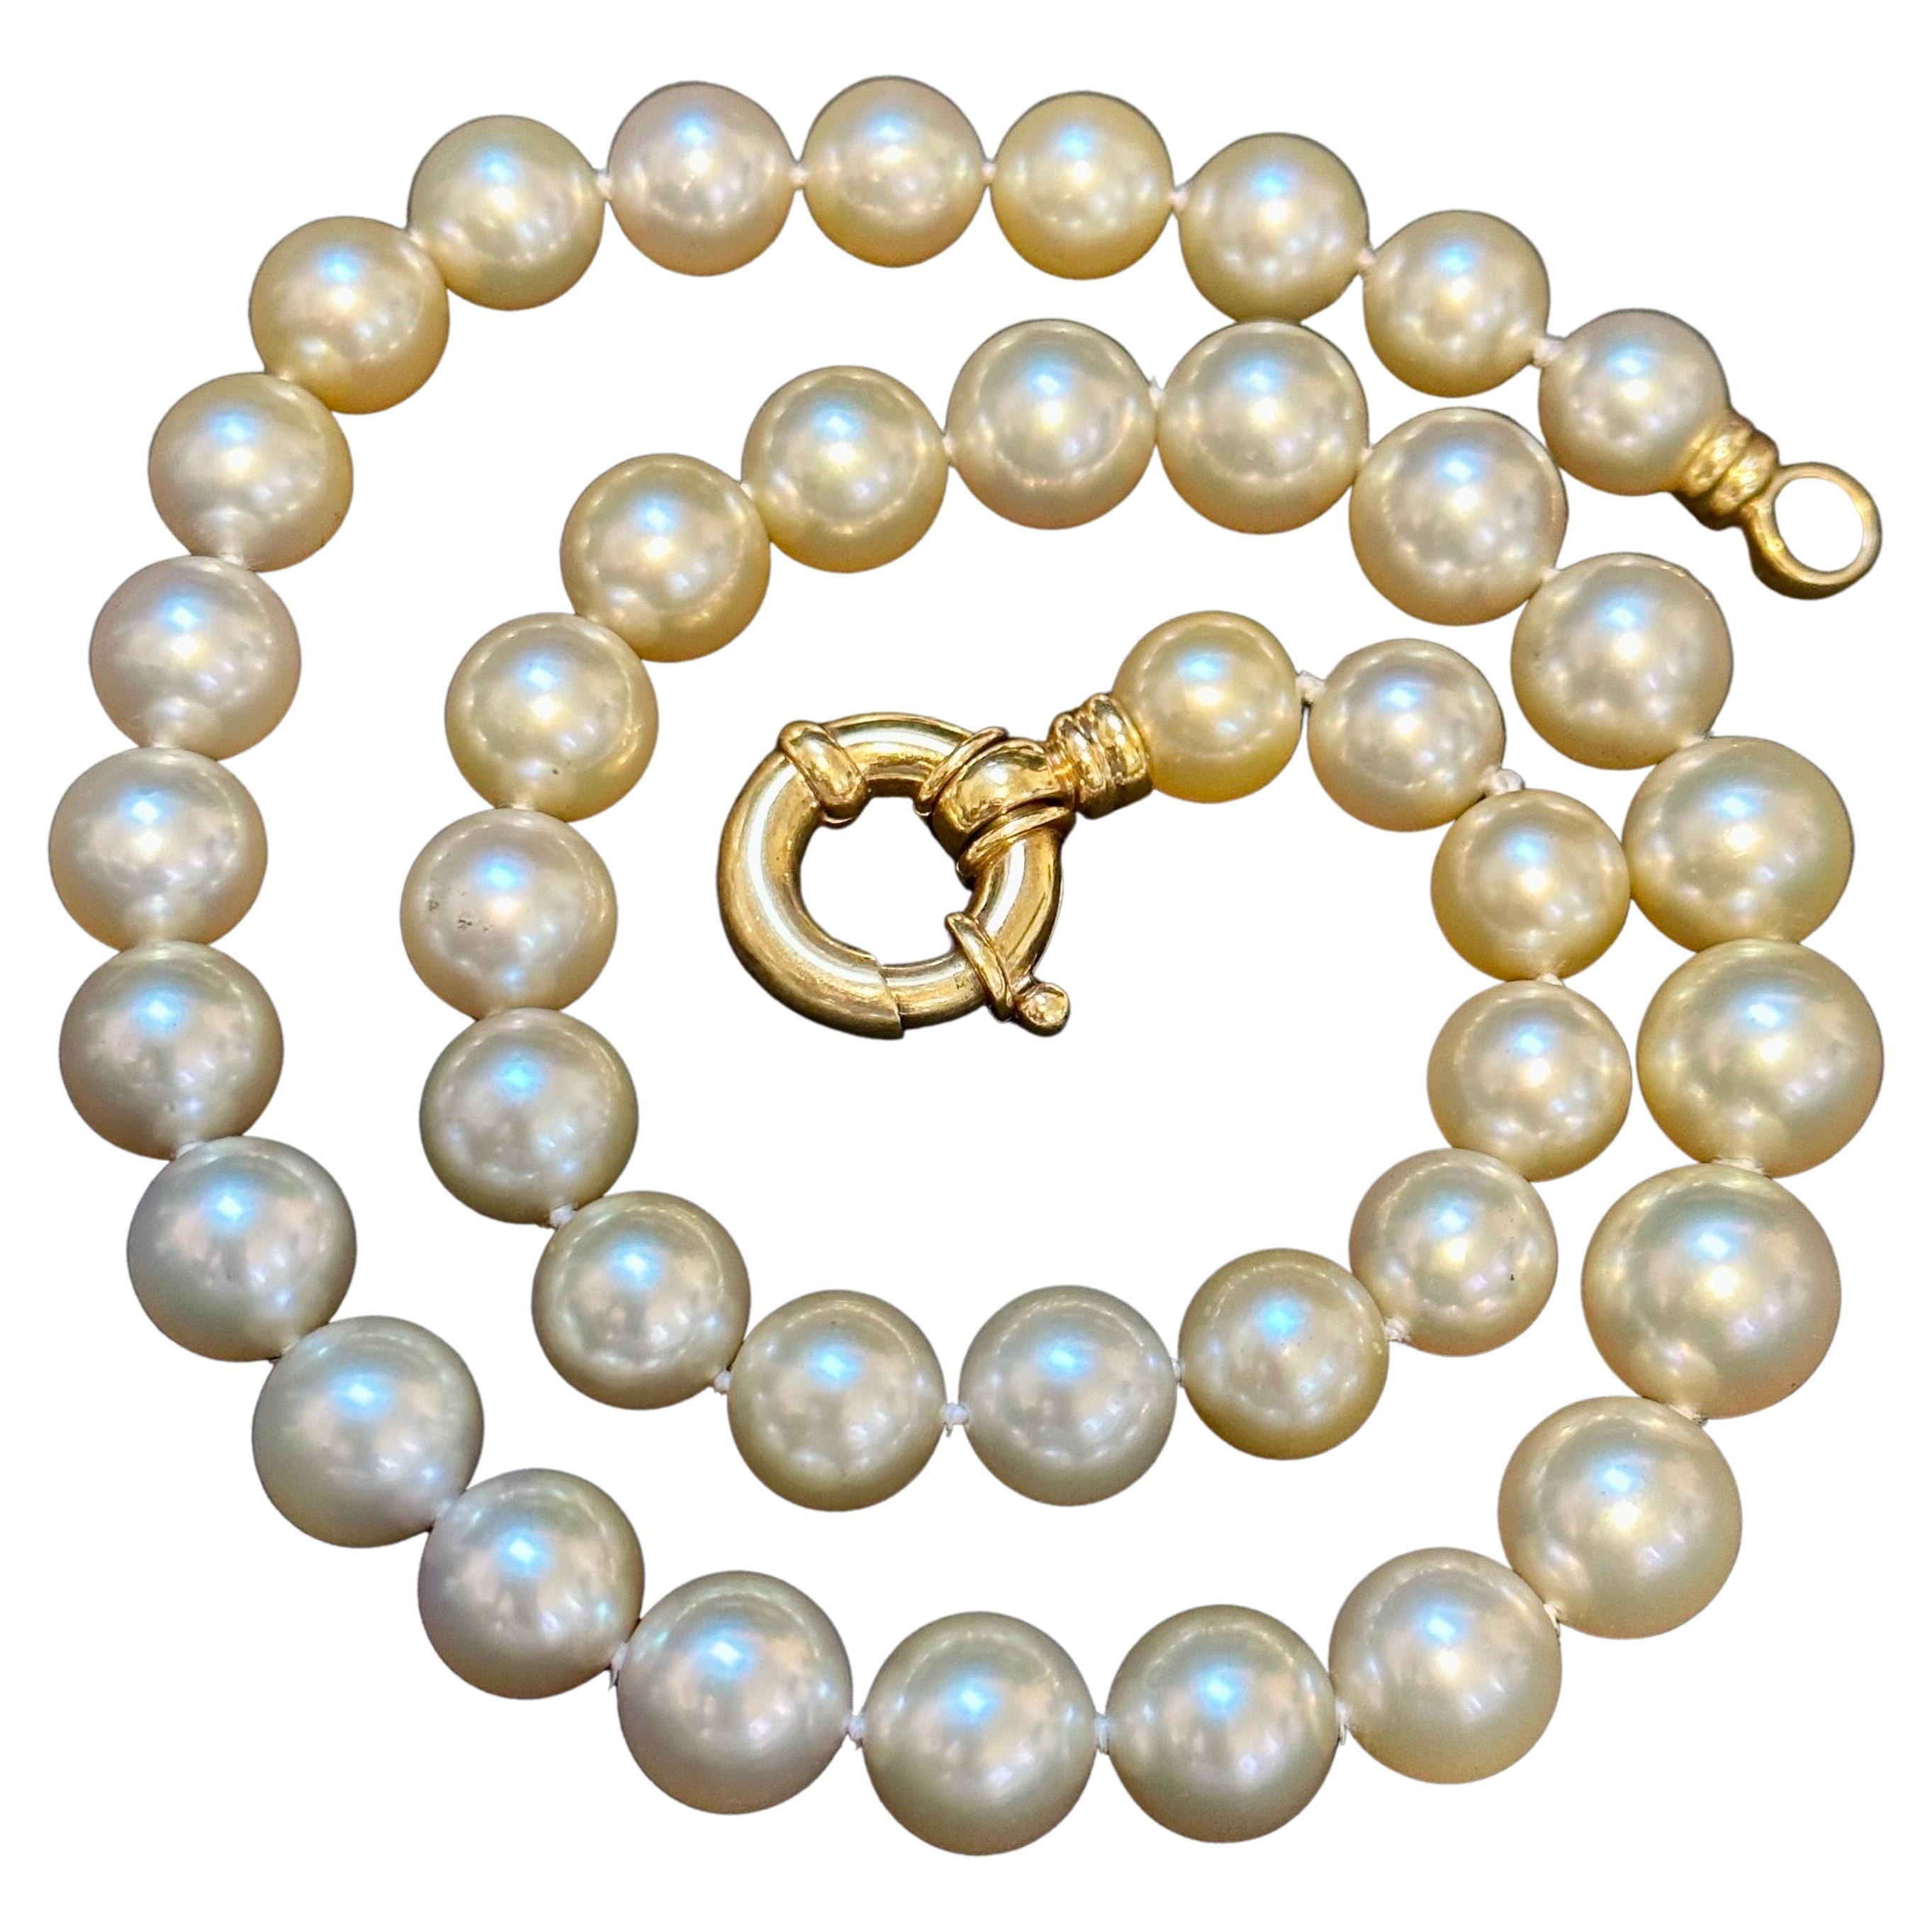 Presenting an exclusive and exquisite estate piece, this 18-inch long strand necklace showcases 41 magnificent golden South Sea pearls. Ranging from 10 to 12mm in size, these pearls exhibit remarkable quality and beauty. The necklace is adorned with